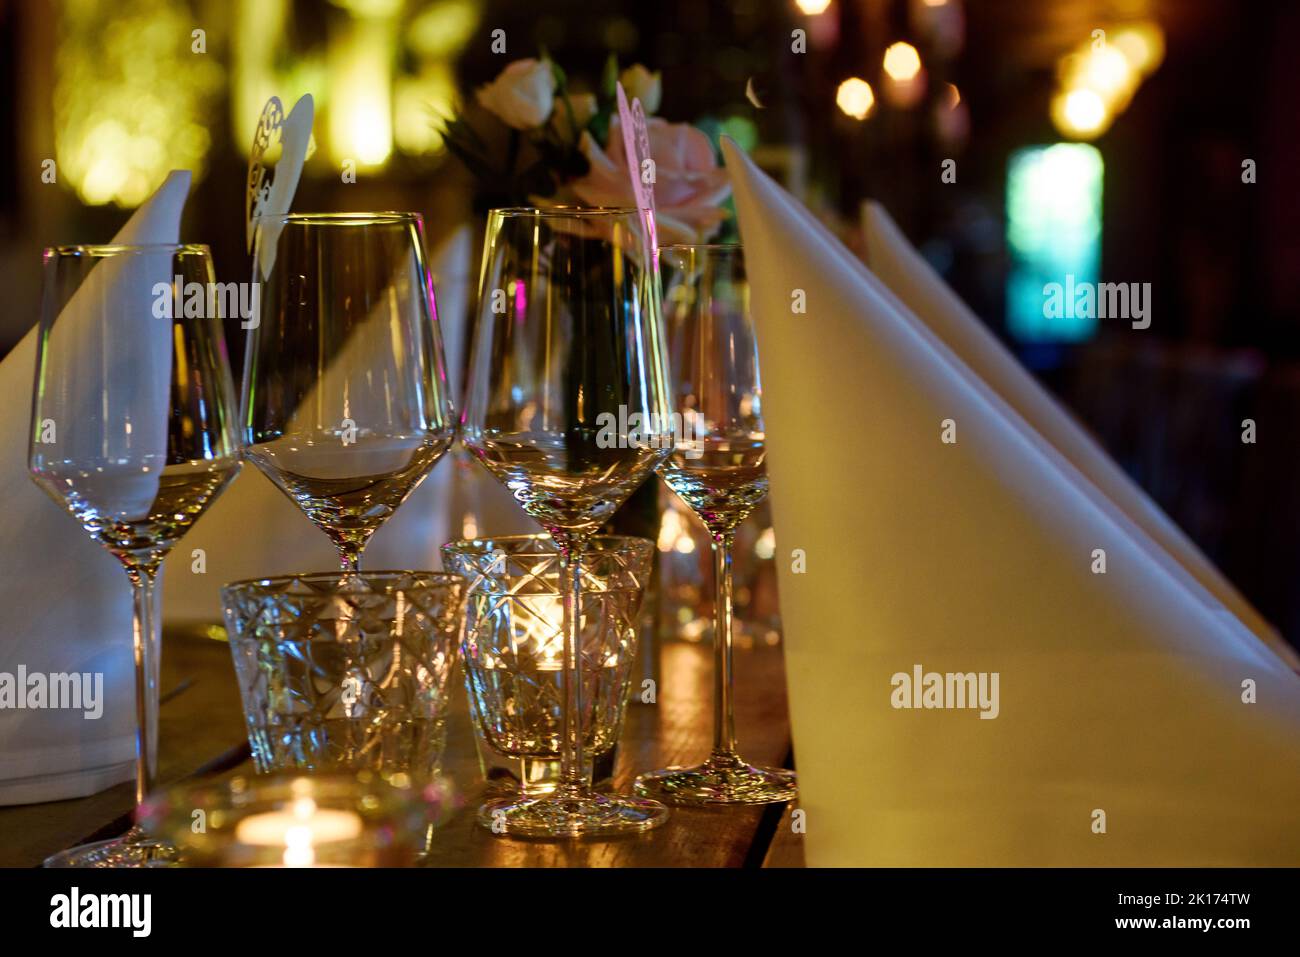 https://c8.alamy.com/comp/2K174TW/closeup-of-a-set-up-table-with-wine-glasses-and-a-white-serviette-on-a-wooden-table-2K174TW.jpg